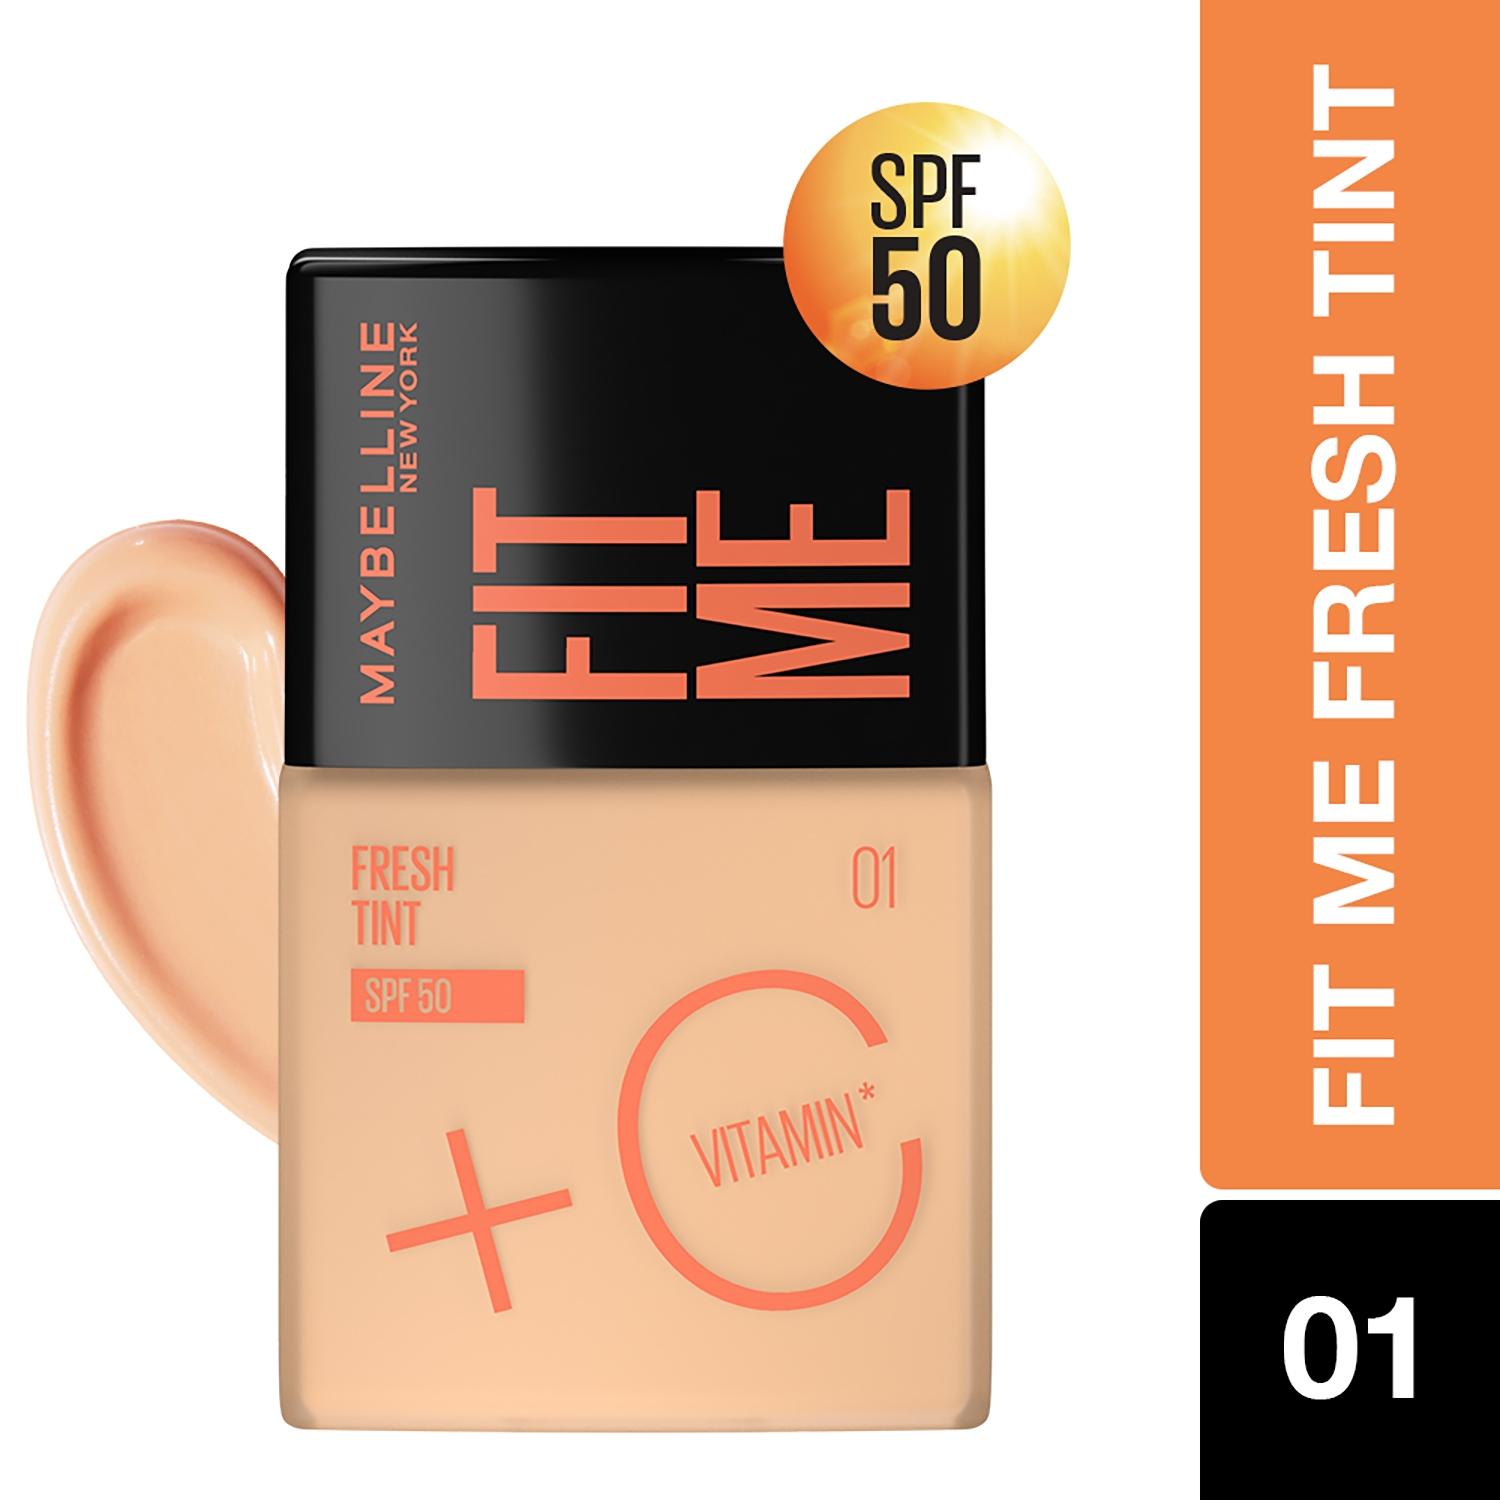 maybelline new york fit me fresh tint with spf 50 & vitamin c - 01 shade (30ml)